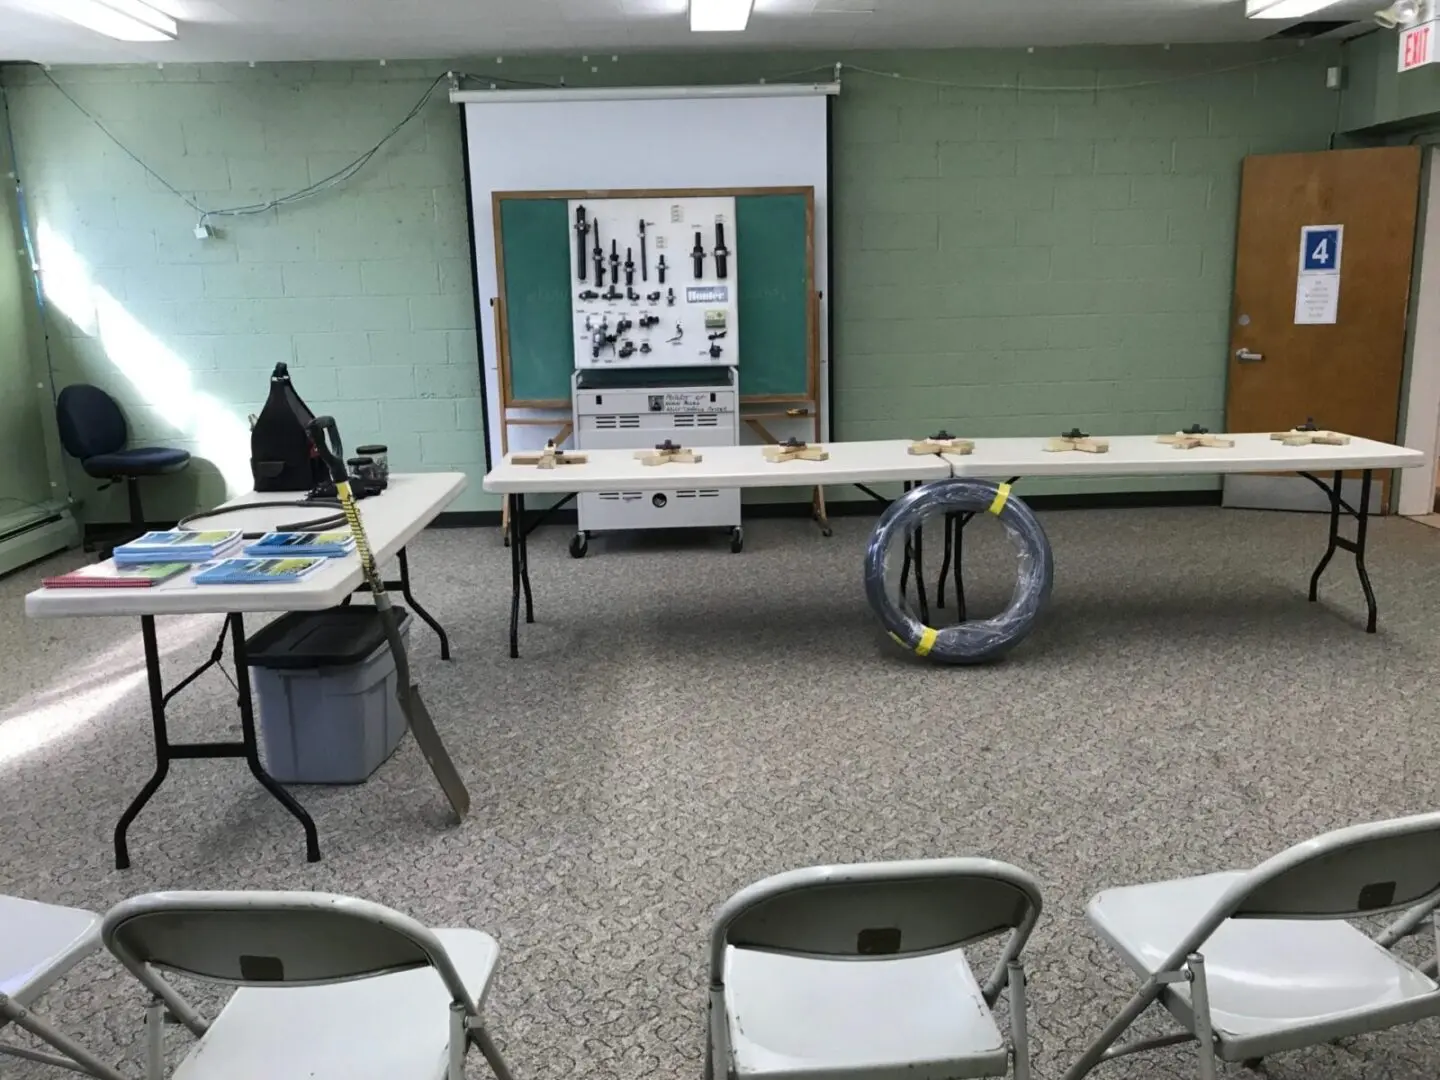 Classroom With Necessary Equipment and Tools For Teaching